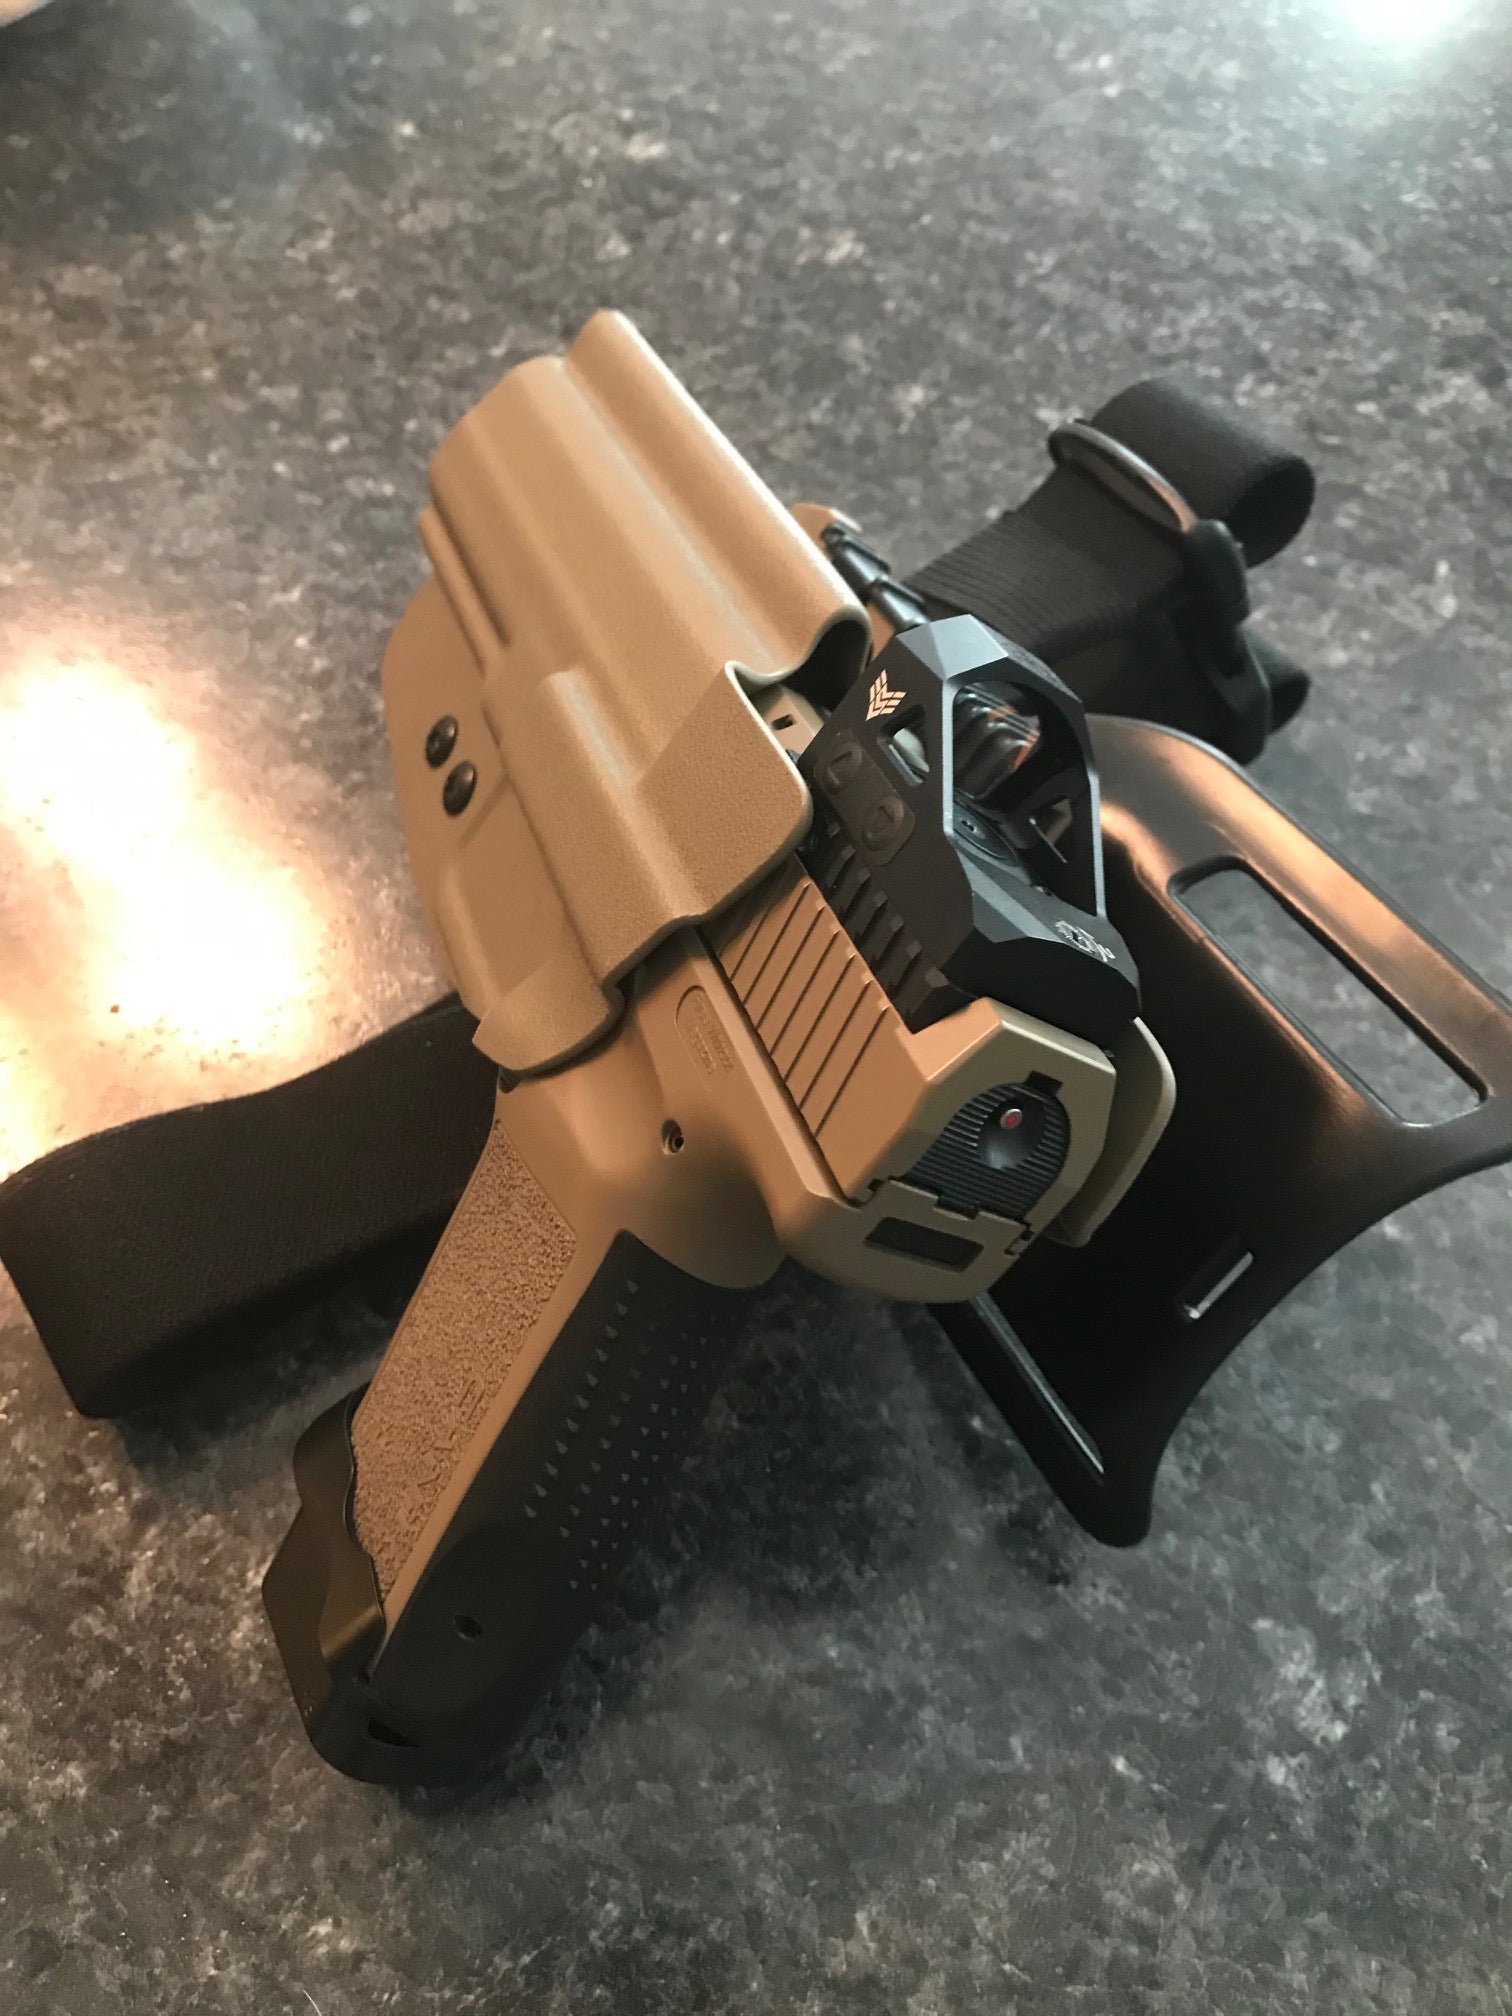 For the best OWB Outside Waistband Duty and Competition Holster designed to fit the Canik TP9 TP9SFX full-size pistols, shop Four Brothers Holsters. Perfect for USPSA, 3-Gun, Steel Challenge, and other competitive shooting sports. Adjustable retention, Open muzzle for threaded barrels. Made in the USA